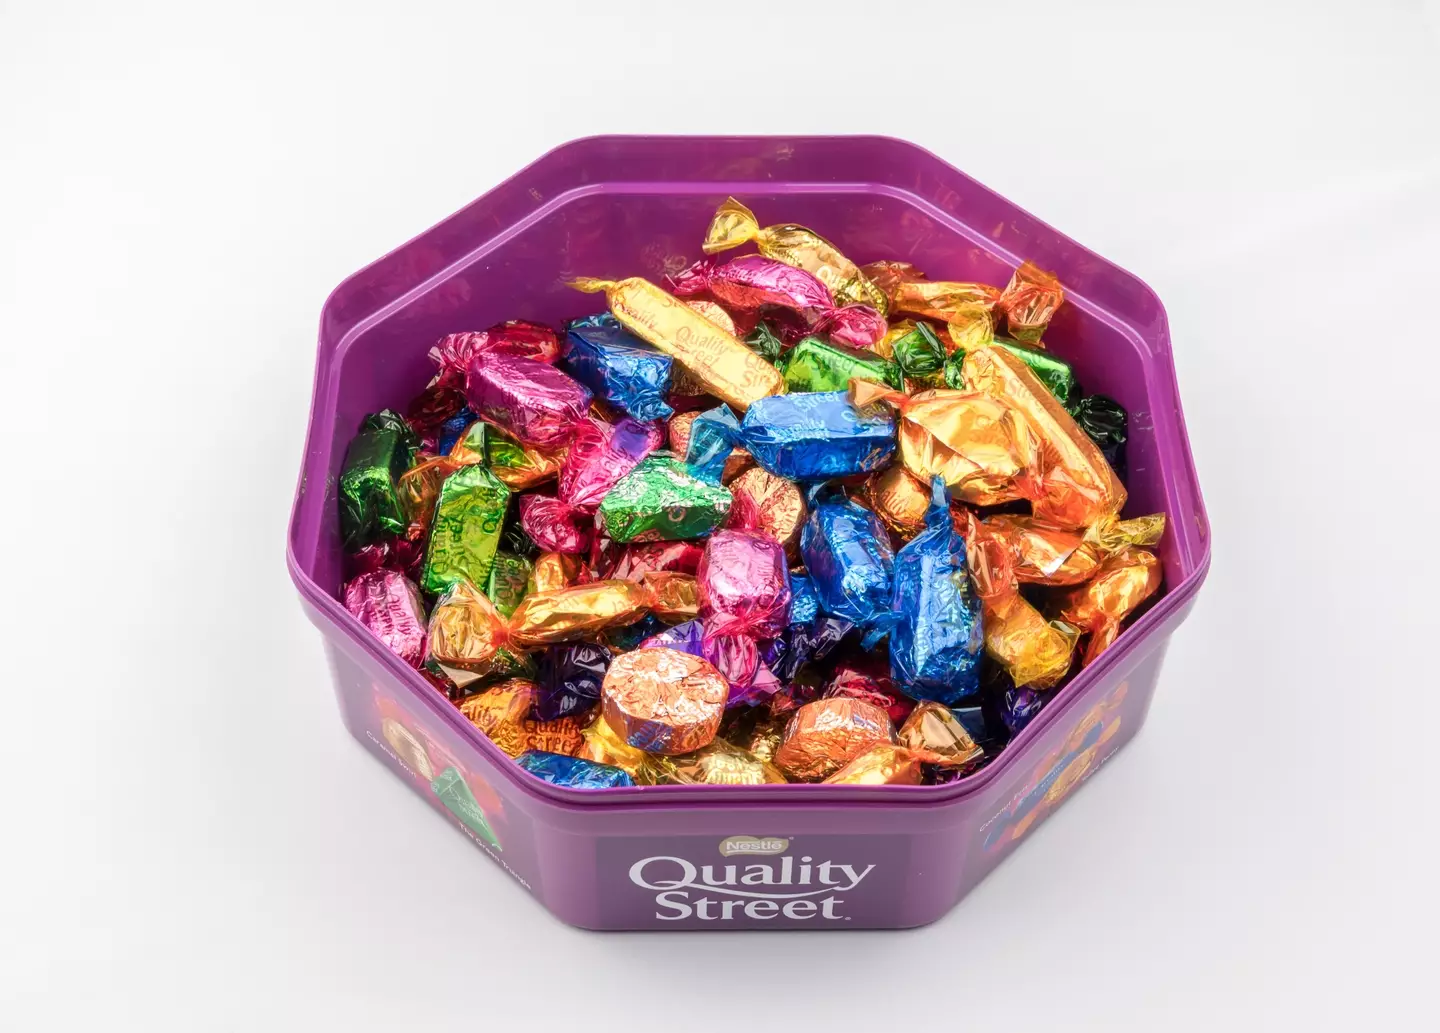 What do you think is the worst Quality Street?